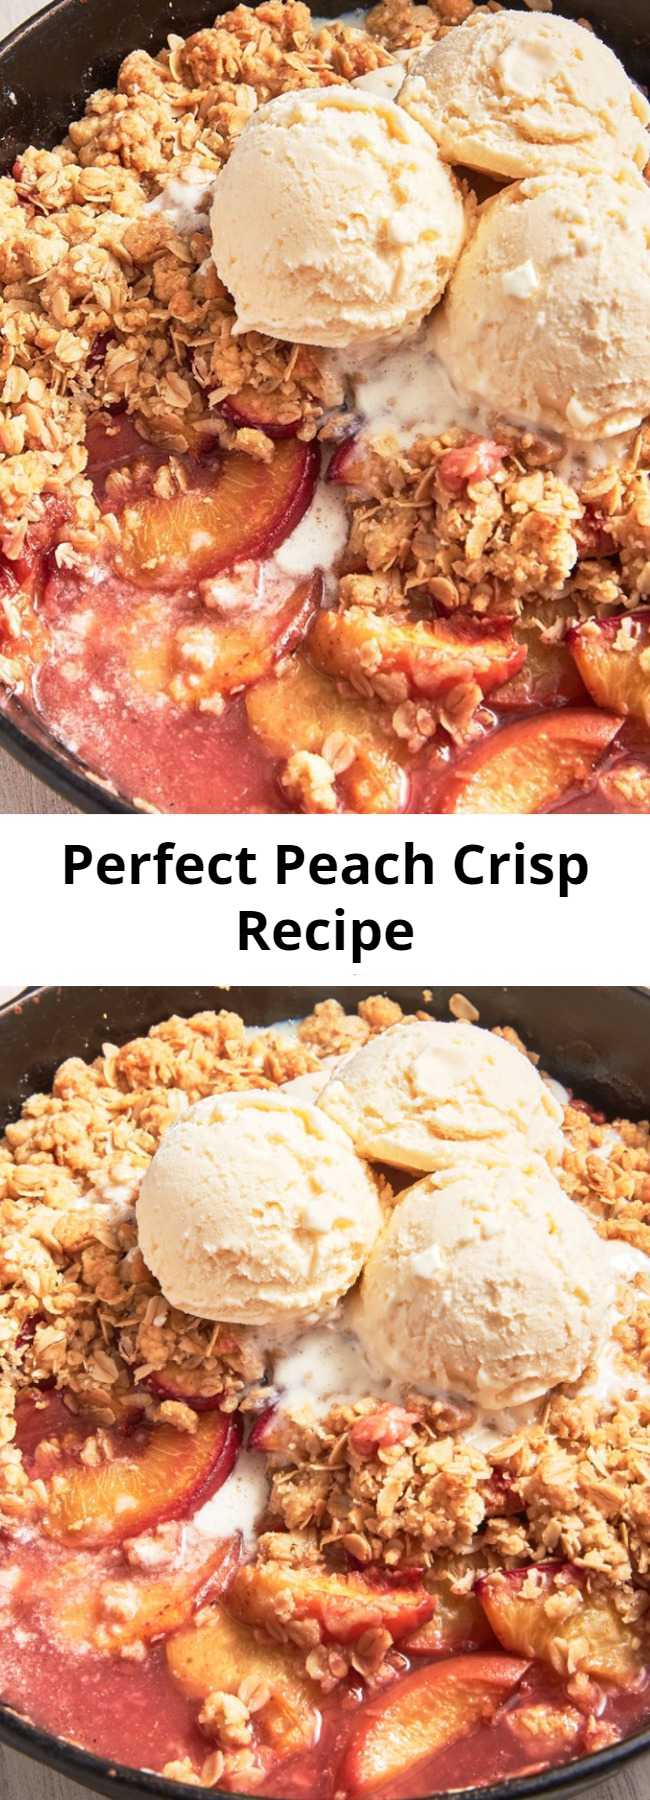 Perfect Peach Crisp Recipe - Peach Crisp is an old-fashioned delight that never fails to please. Always a crowd pleaser.